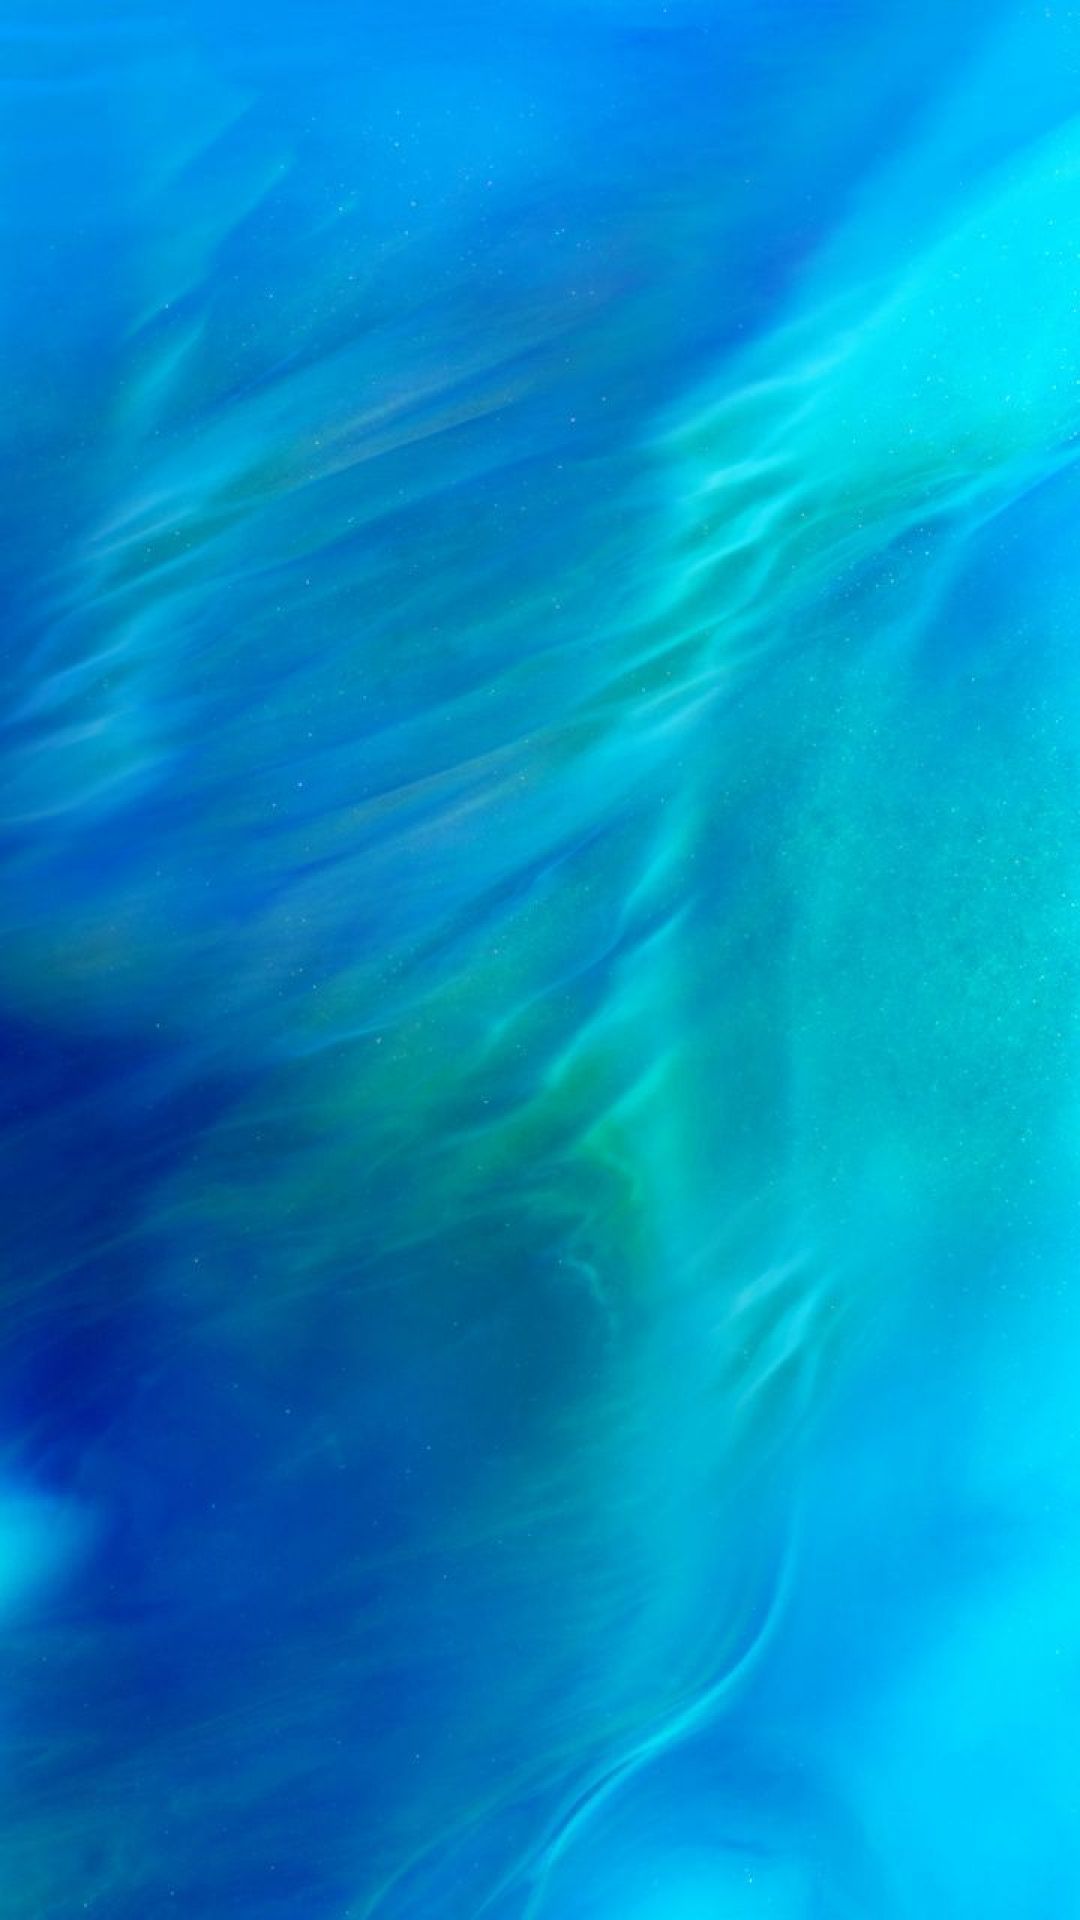 Blue and green abstract wallpaper for iPhone and Android - Cyan